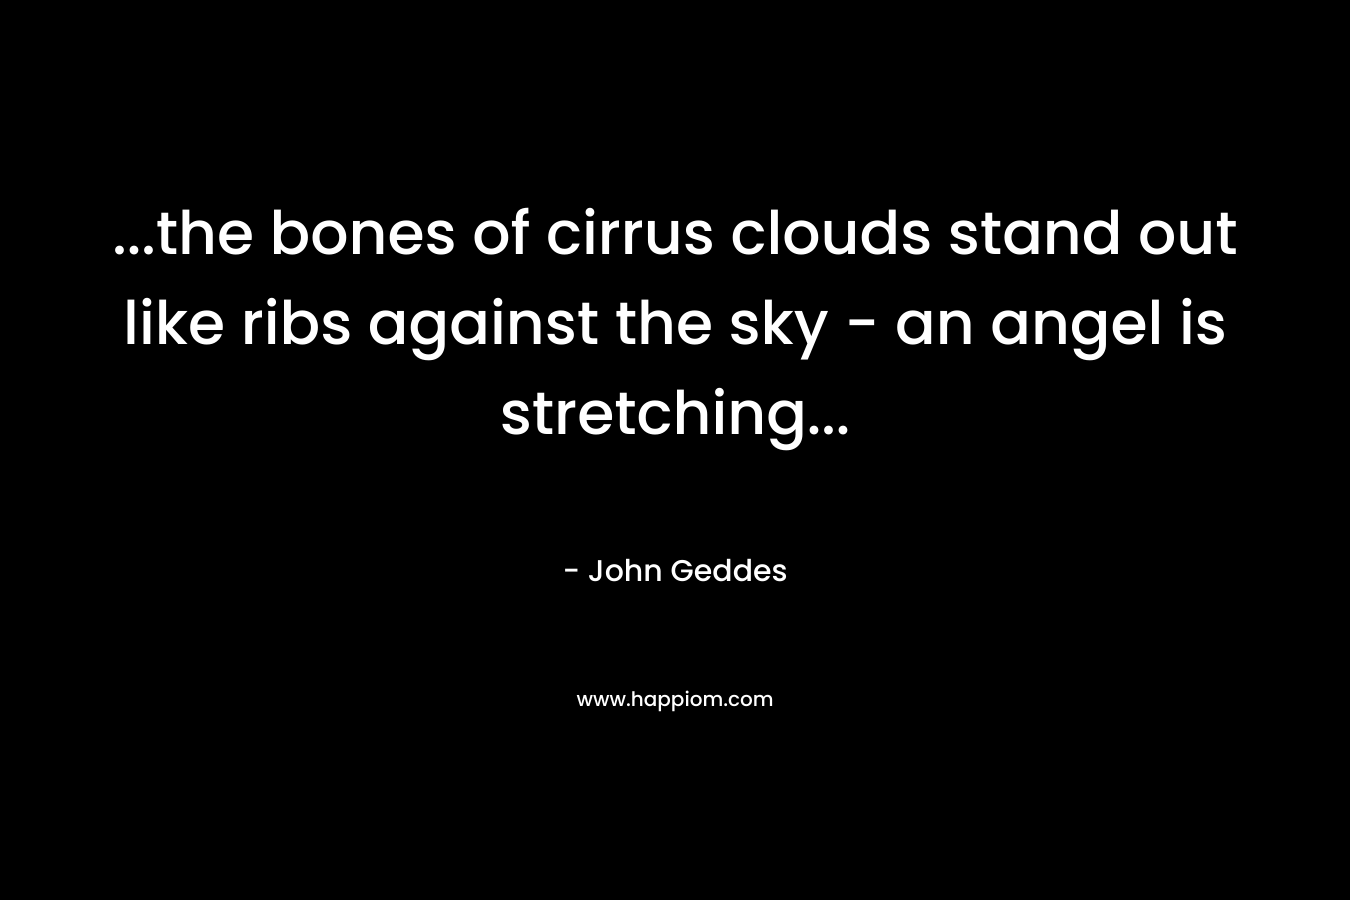 ...the bones of cirrus clouds stand out like ribs against the sky - an angel is stretching...